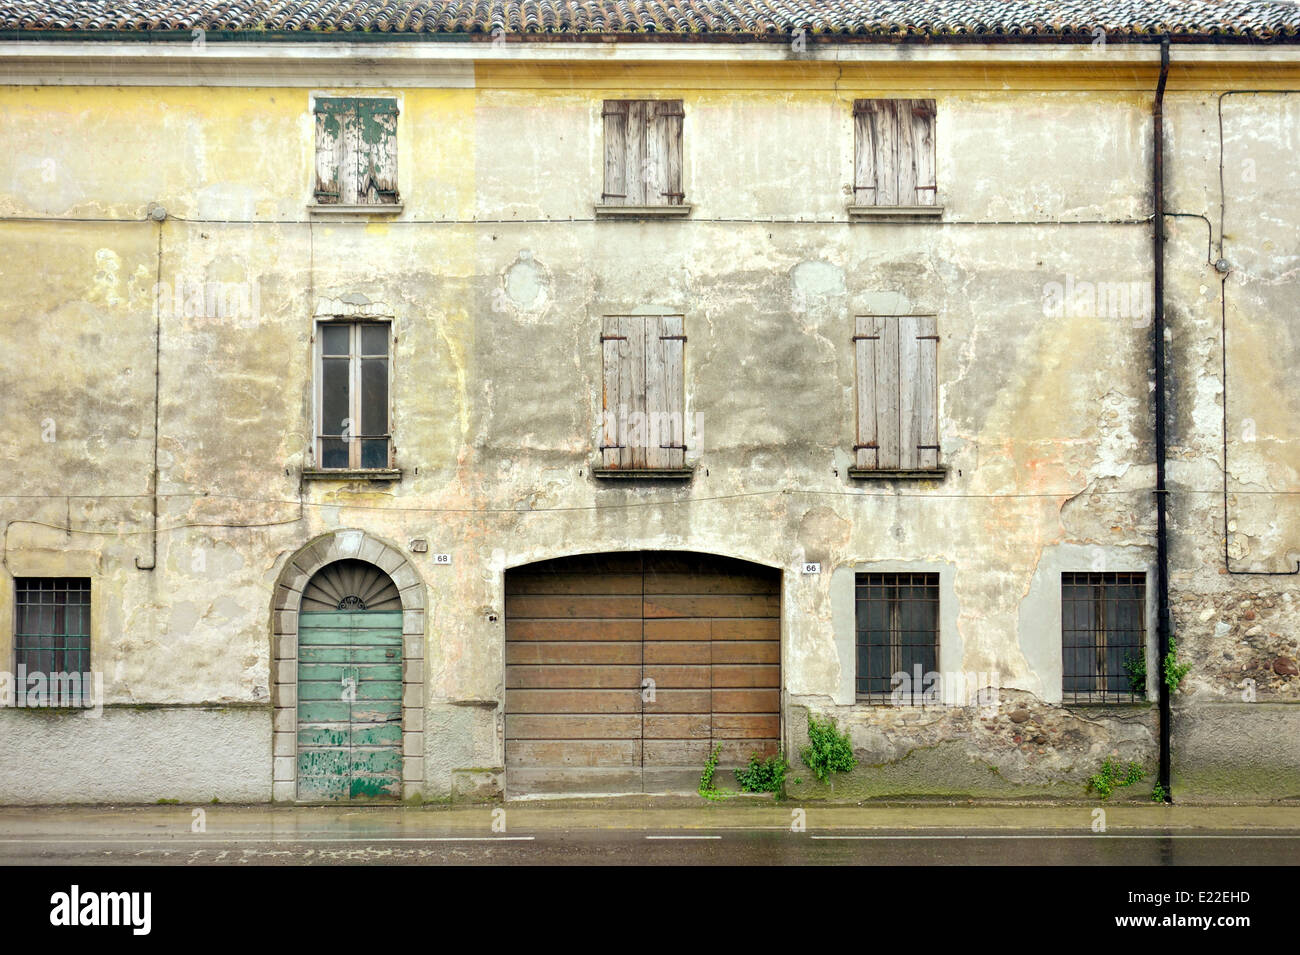 Rustic building in the Mantua province, Italy Stock Photo